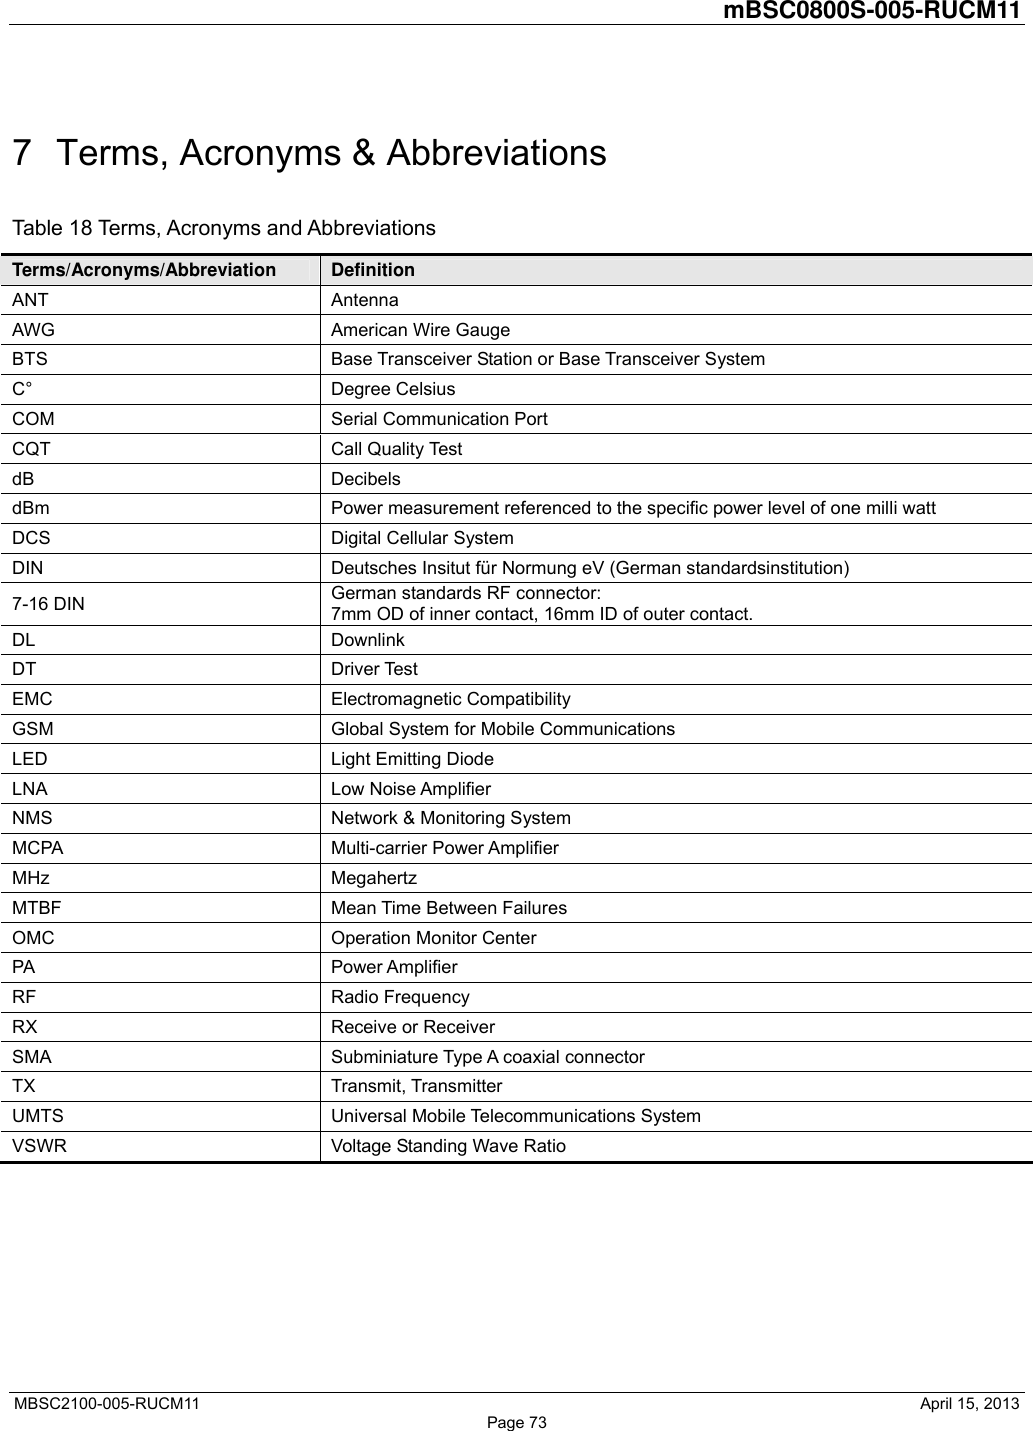         mBSC0800S-005-RUCM11   MBSC2100-005-RUCM11                                              April 15, 2013 Page 73 7 Terms, Acronyms &amp; Abbreviations Table 18 Terms, Acronyms and Abbreviations Terms/Acronyms/Abbreviation  Definition ANT Antenna AWG  American Wire Gauge BTS  Base Transceiver Station or Base Transceiver System C° Degree Celsius COM Serial Communication Port CQT Call Quality Test dB Decibels dBm  Power measurement referenced to the specific power level of one milli watt DCS Digital Cellular System DIN  Deutsches Insitut für Normung eV (German standardsinstitution) 7-16 DIN  German standards RF connector: 7mm OD of inner contact, 16mm ID of outer contact. DL Downlink DT Driver Test EMC Electromagnetic Compatibility GSM  Global System for Mobile Communications LED  Light Emitting Diode LNA Low Noise Amplifier NMS  Network &amp; Monitoring System MCPA Multi-carrier Power Amplifier MHz Megahertz MTBF  Mean Time Between Failures OMC  Operation Monitor Center PA Power Amplifier RF Radio Frequency RX  Receive or Receiver SMA  Subminiature Type A coaxial connector TX Transmit, Transmitter UMTS  Universal Mobile Telecommunications System VSWR  Voltage Standing Wave Ratio        